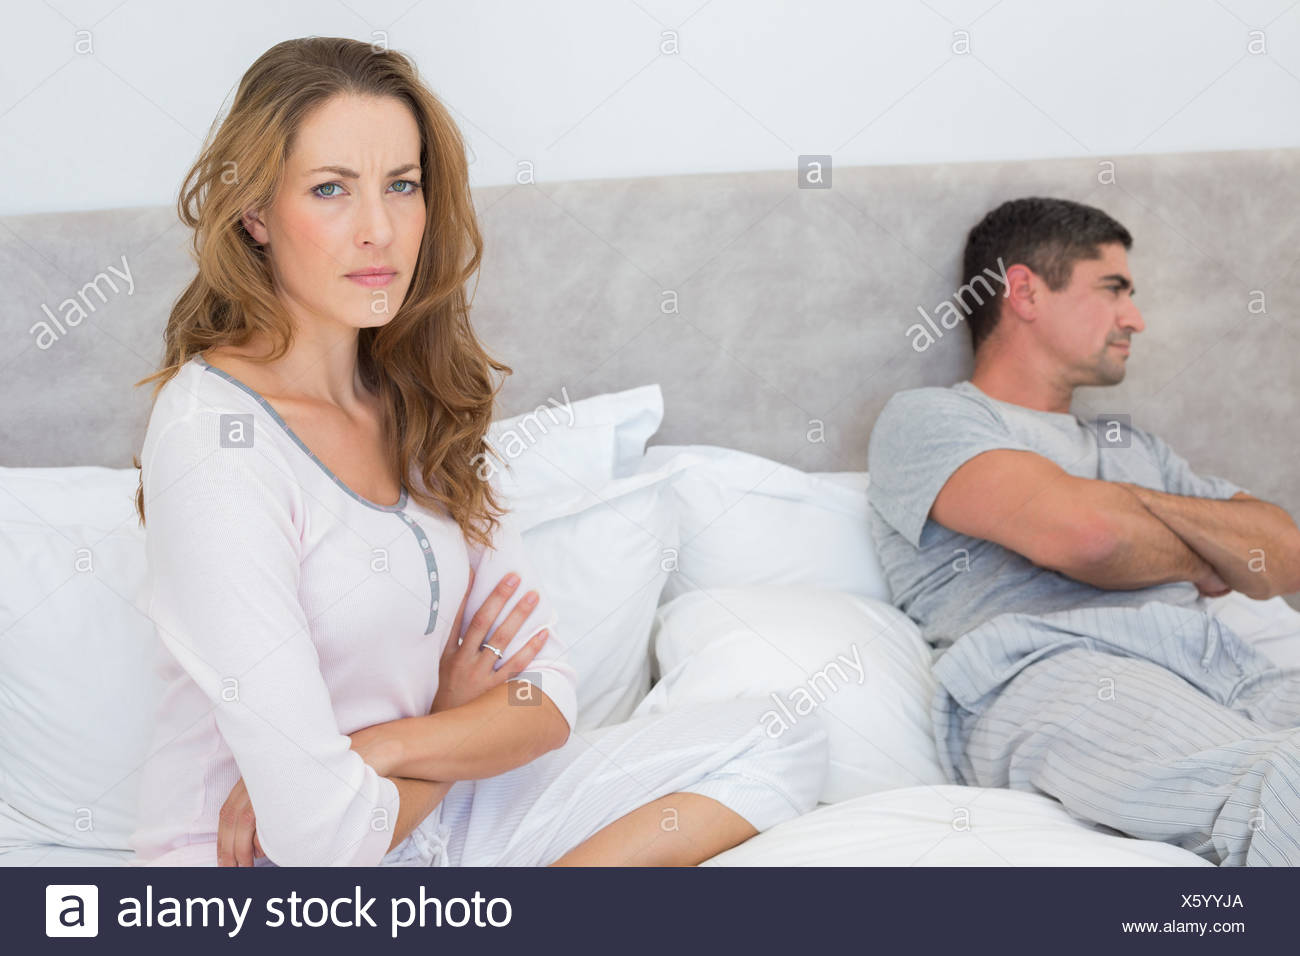 Angry woman with man in bed Stock Photo   Alamy